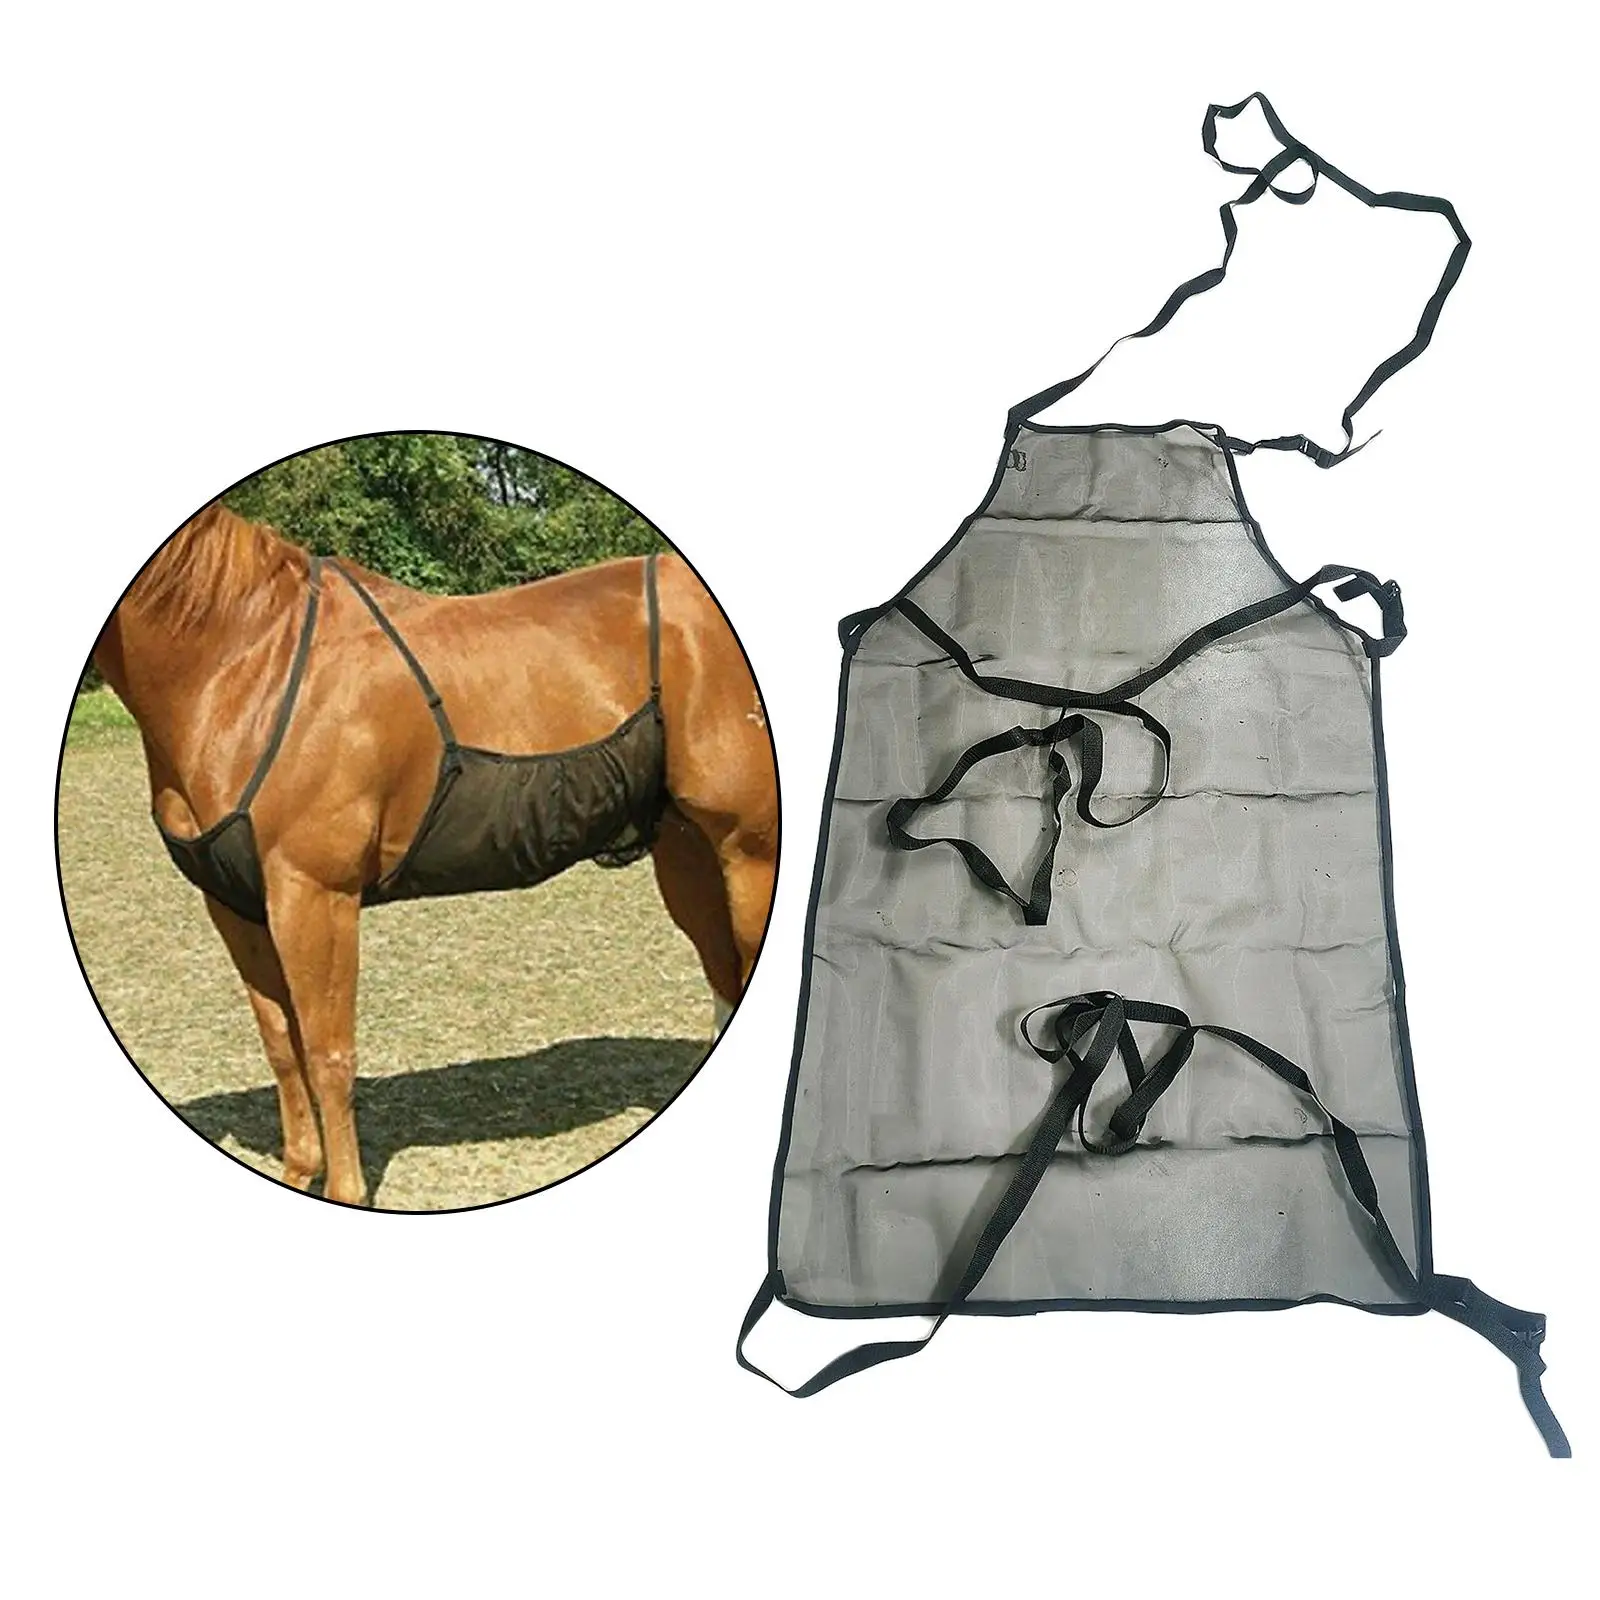 Fly Rug - Pony Horse Sheet Belly Cover Blanket Abdomen Coverage Protective